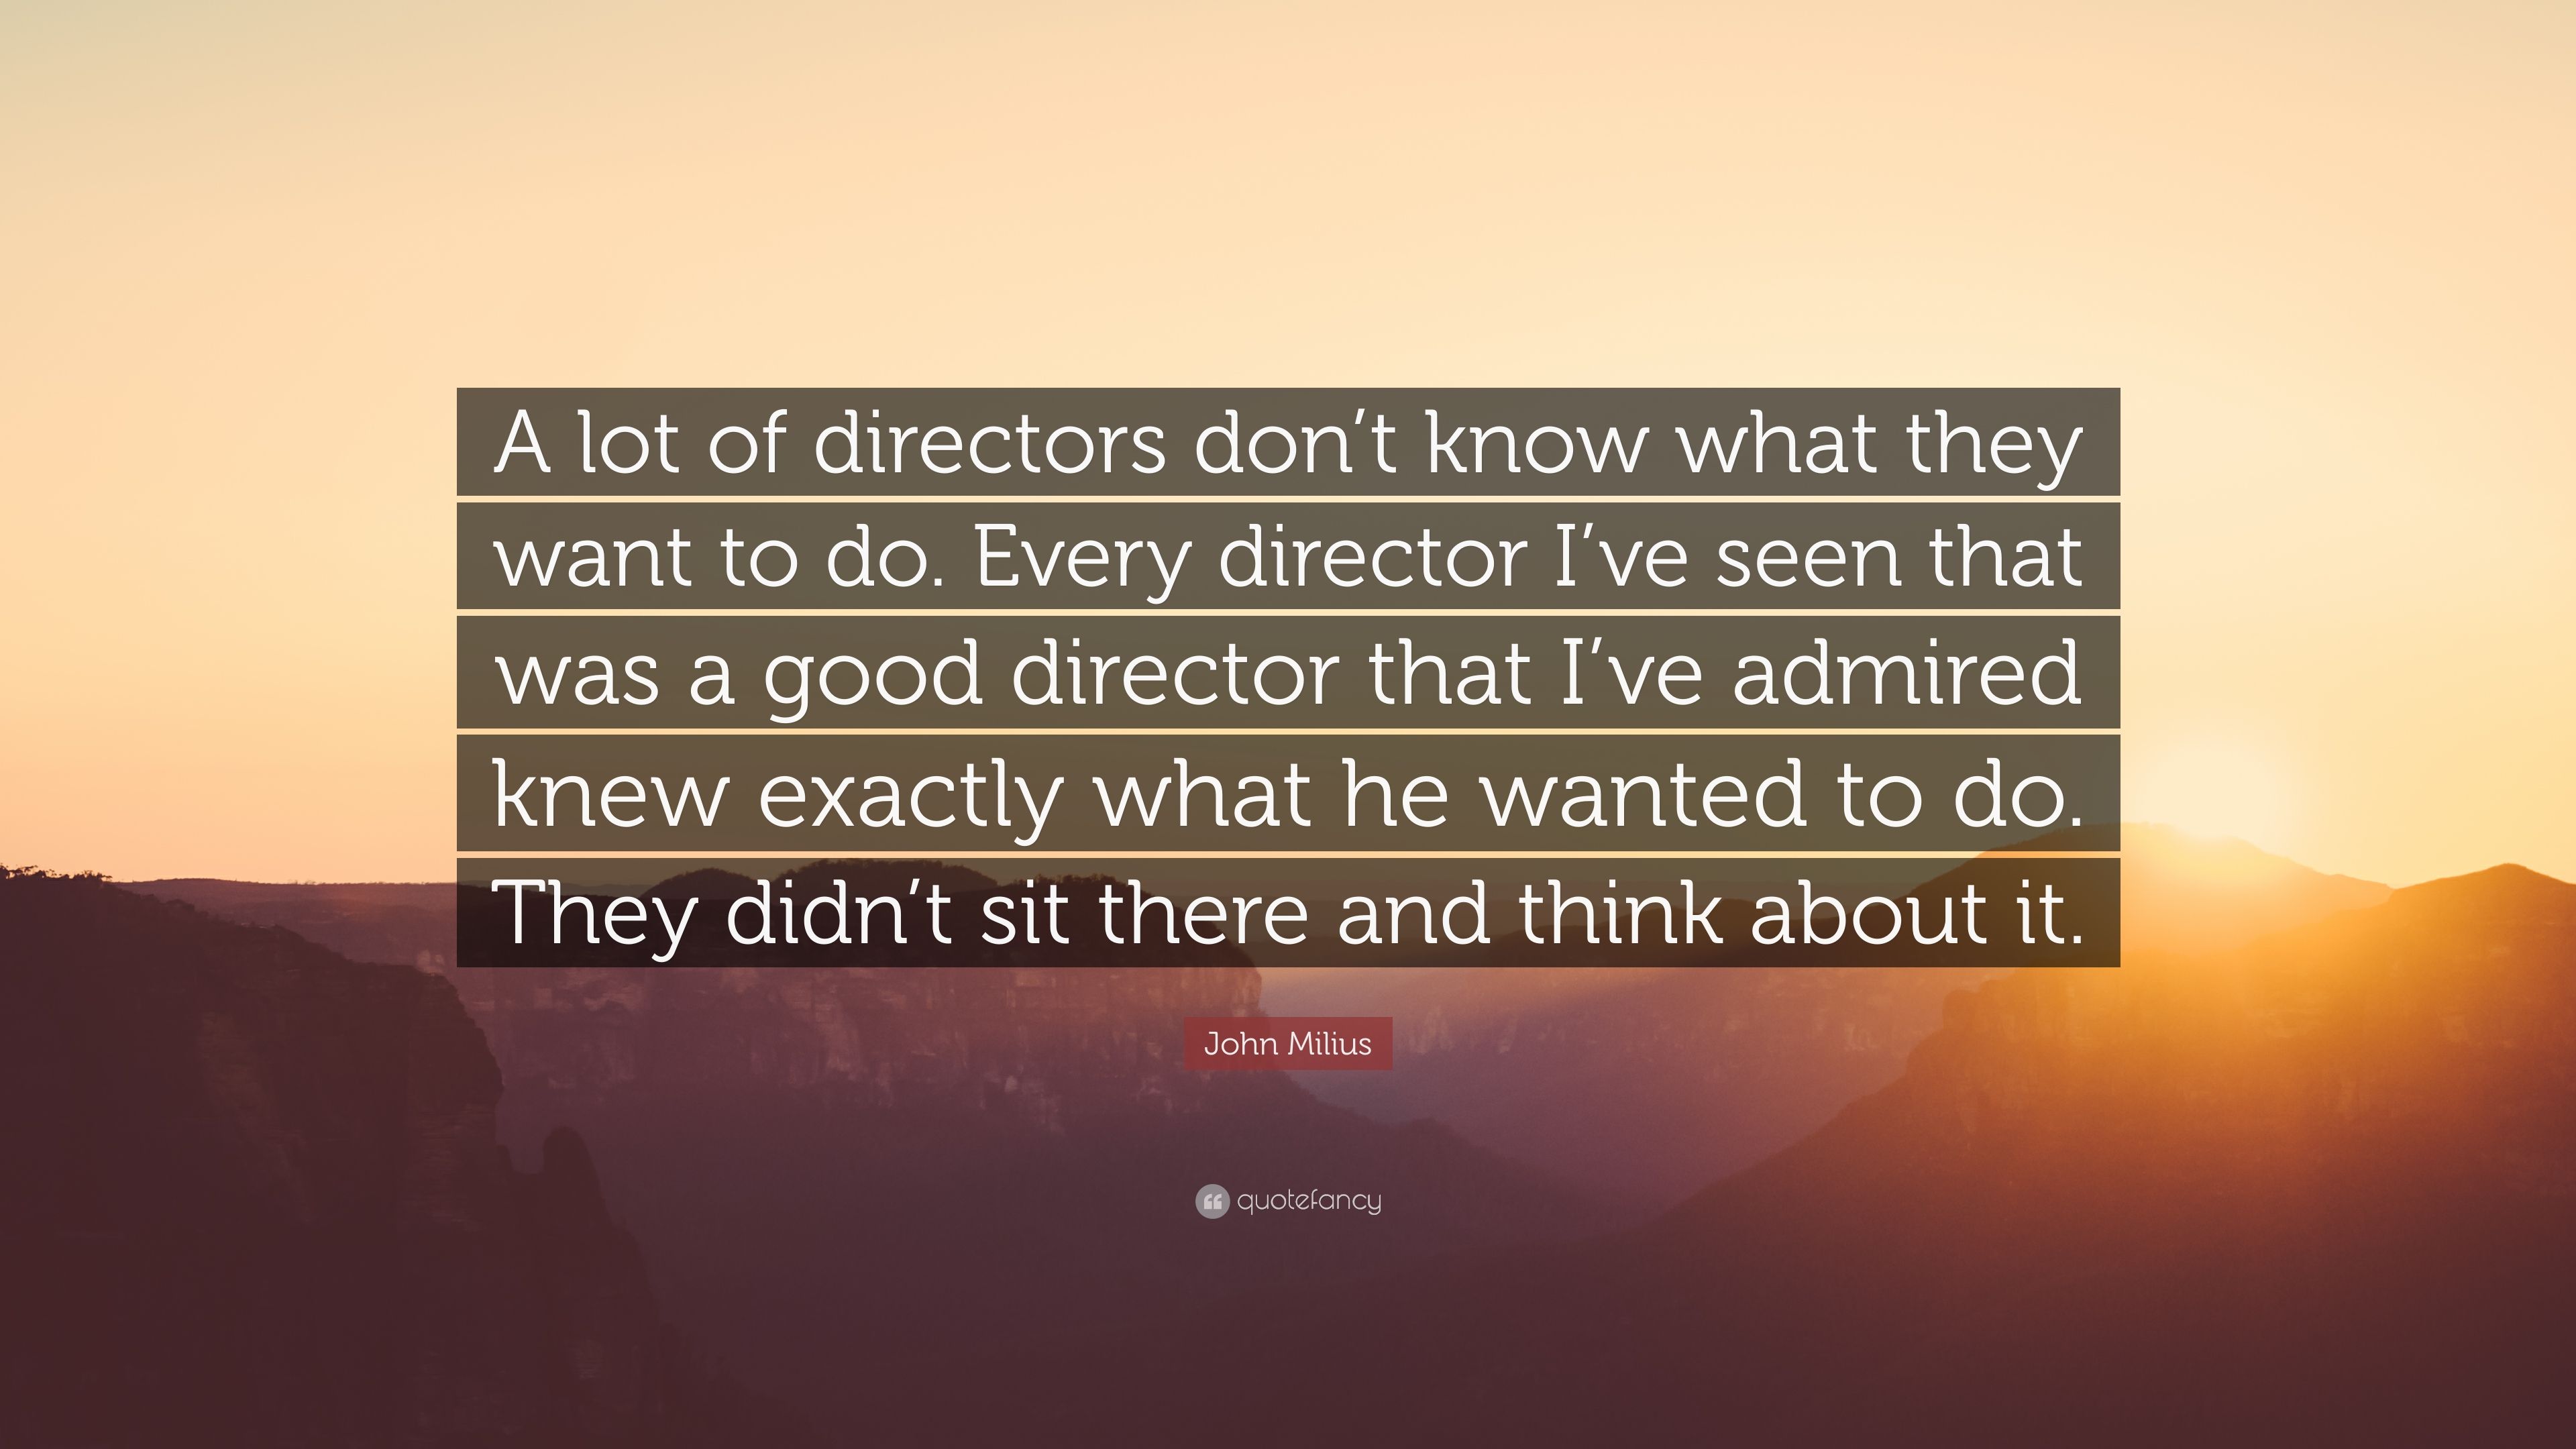 John Milius Quote: “A lot of directors don't know what they want